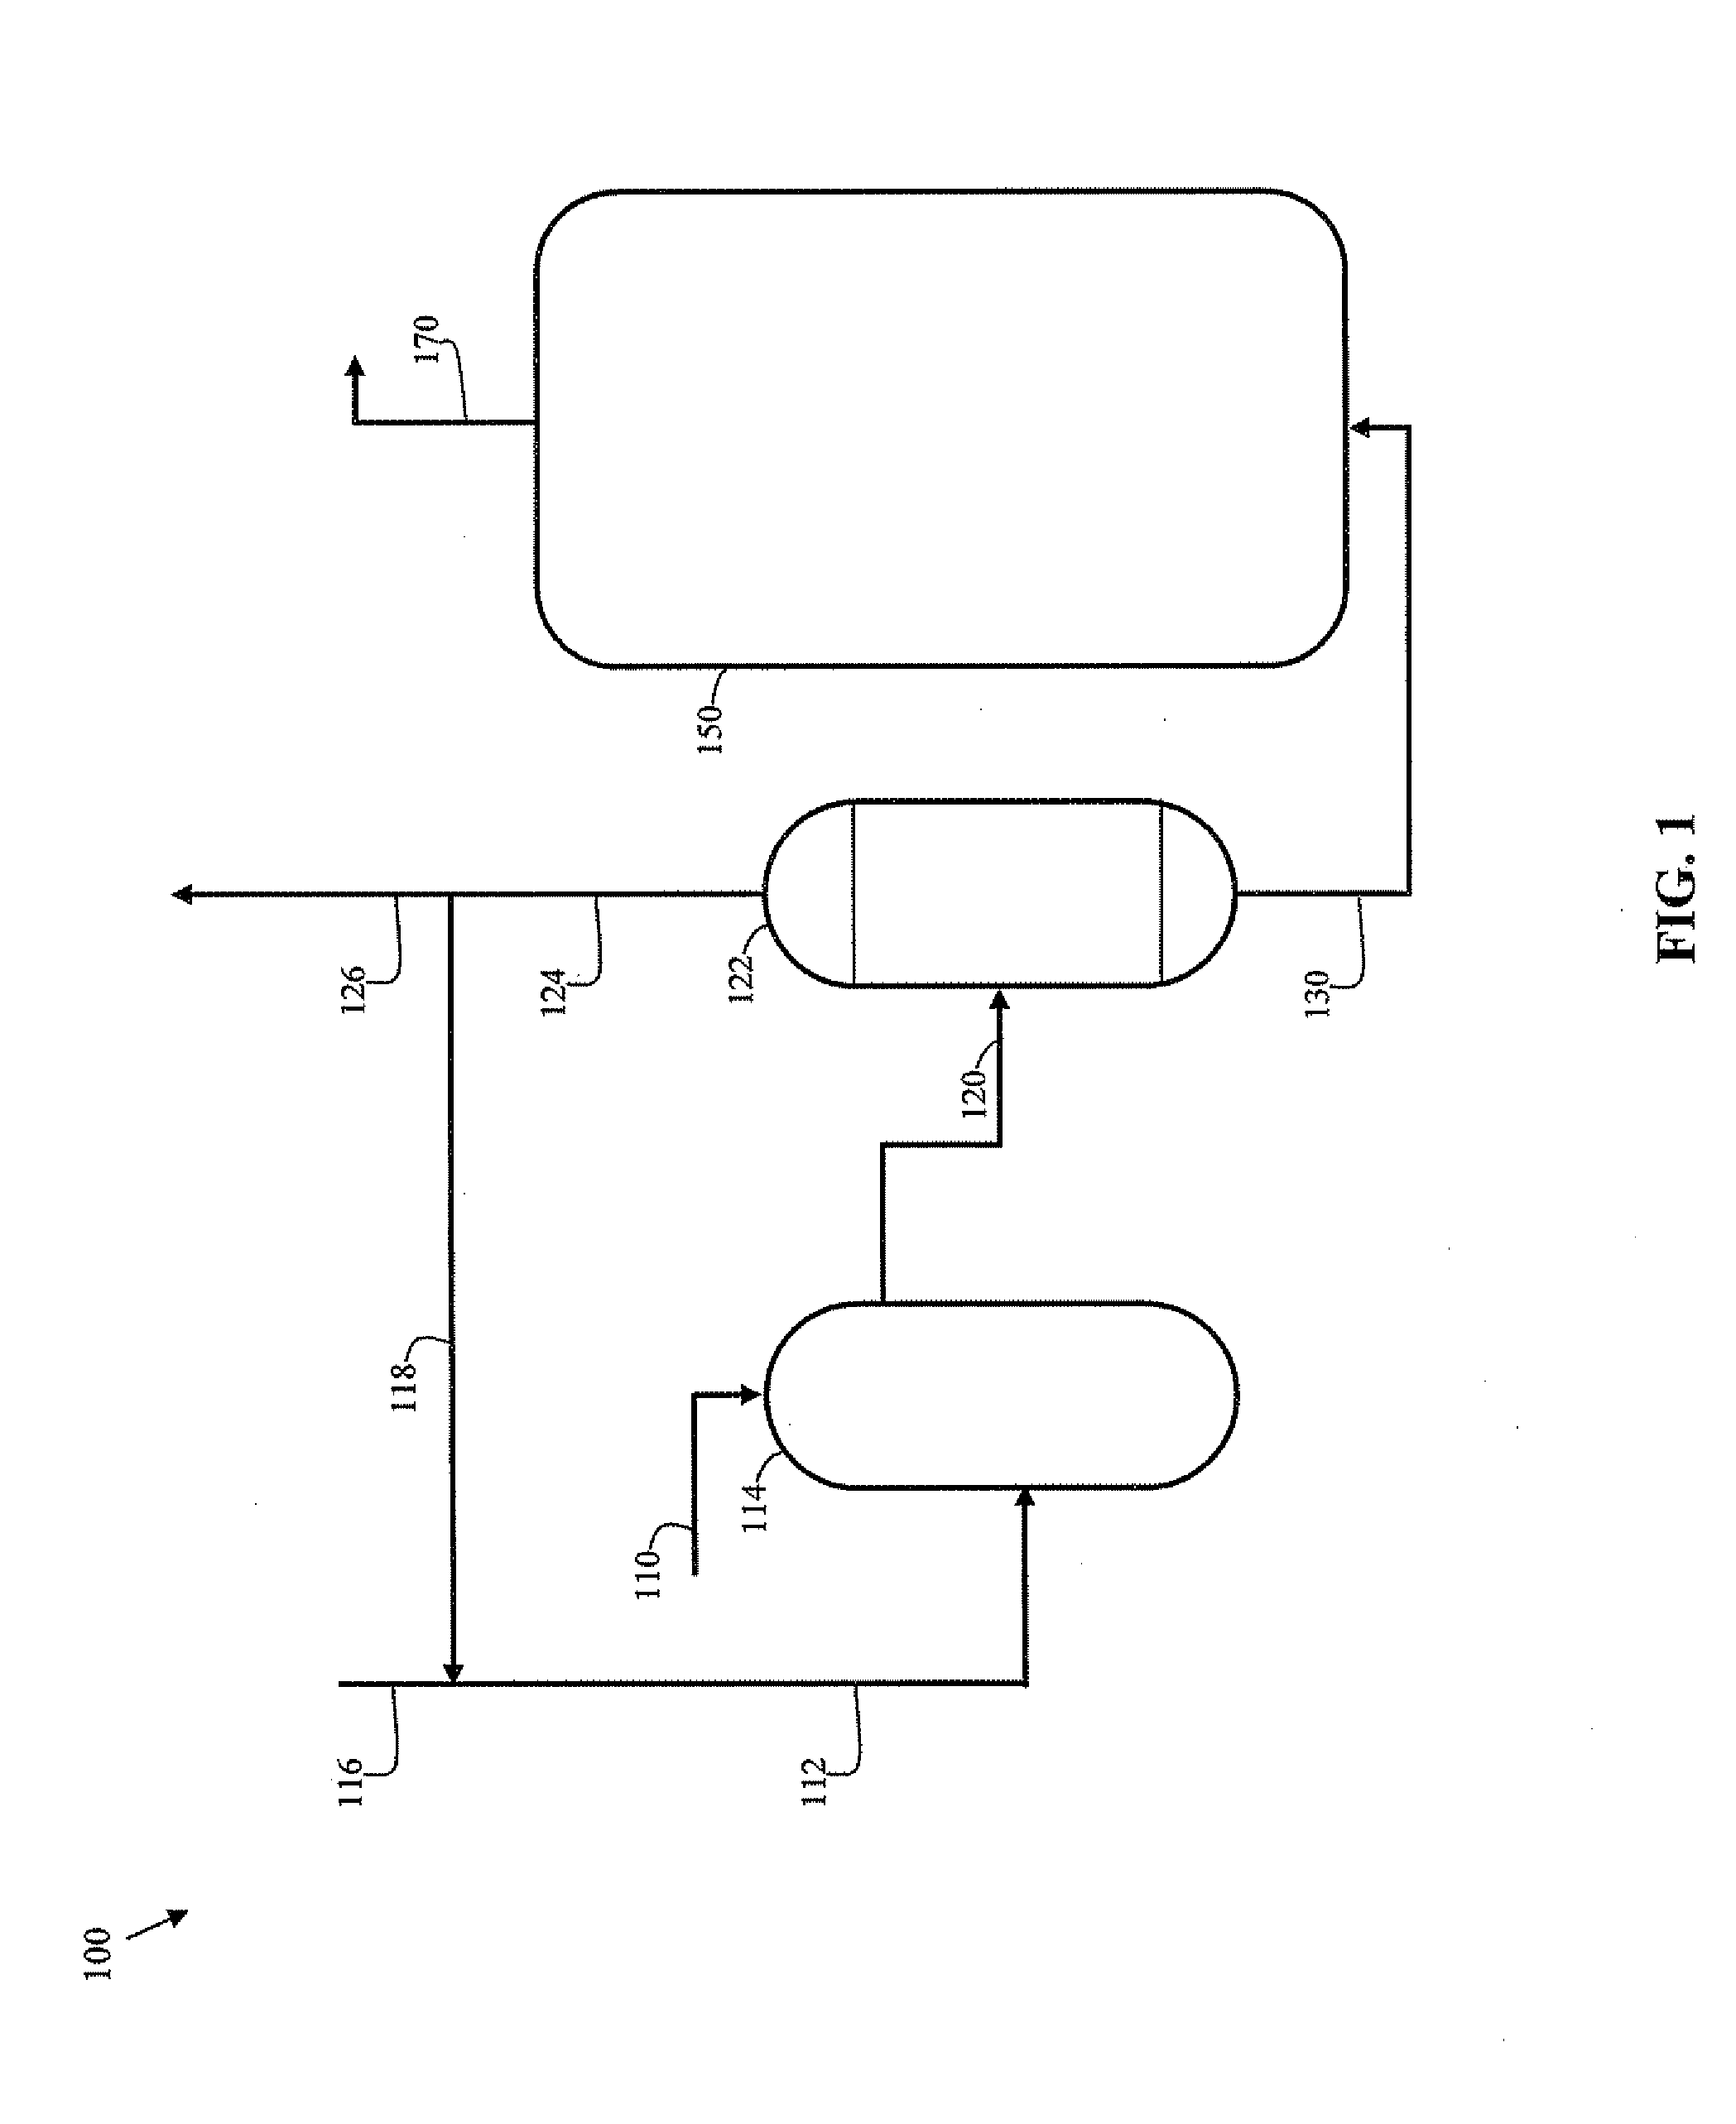 Hydrogen-enriched feedstock for fluidized catalytic cracking process